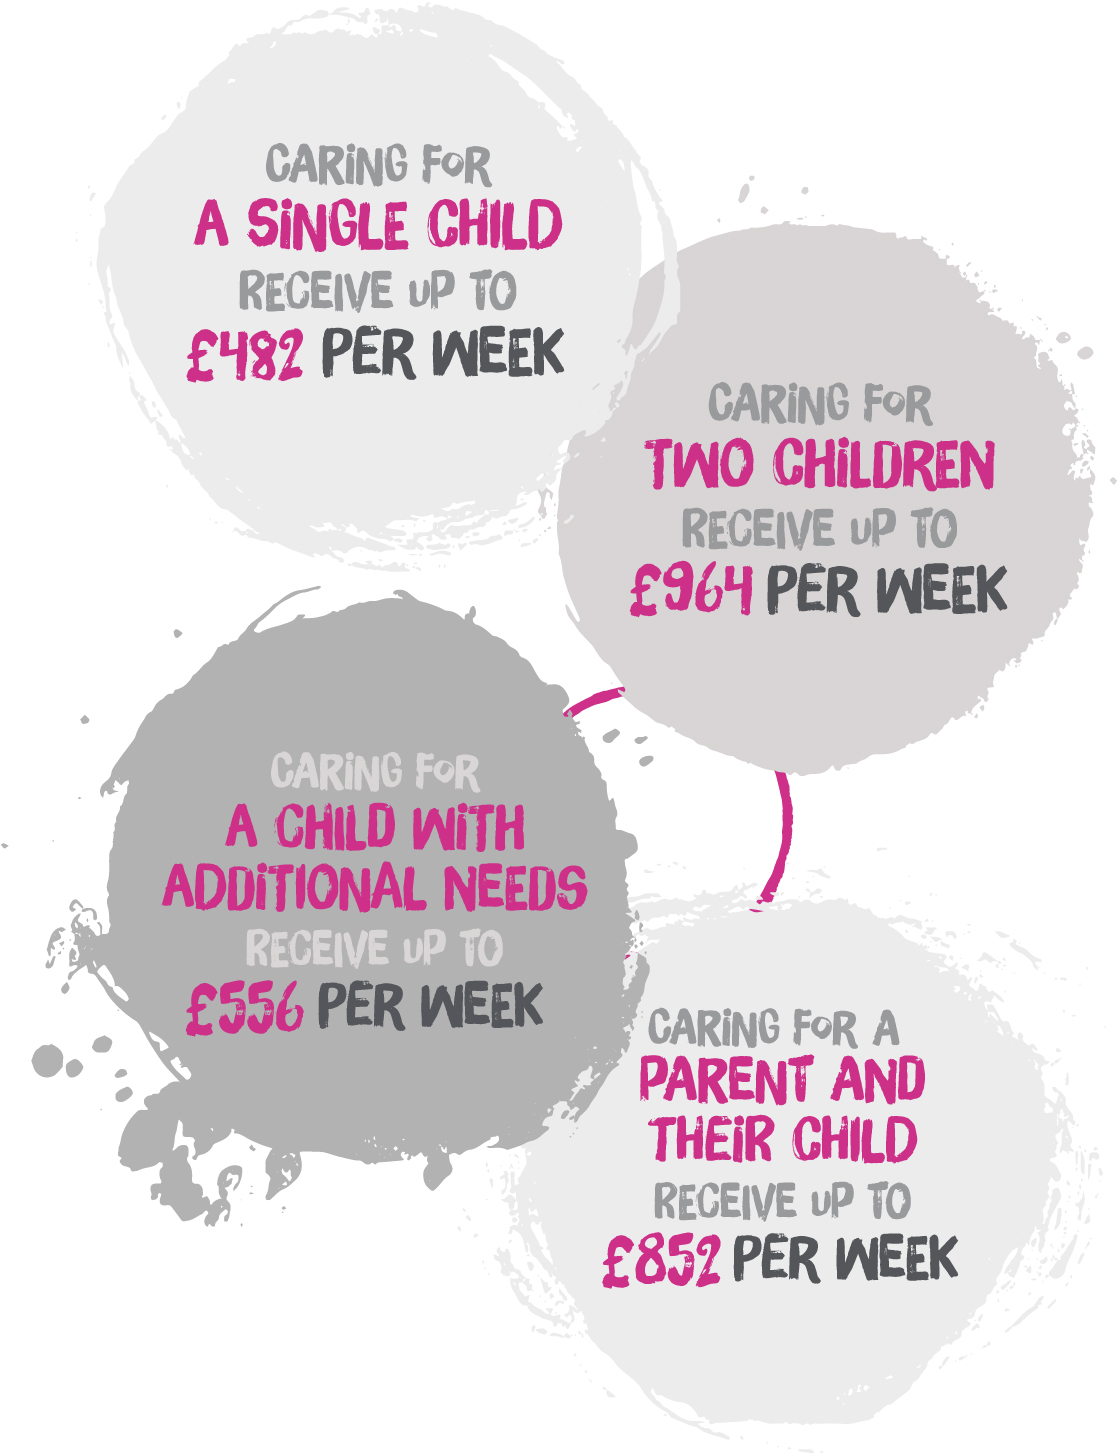 These are our fees if you're thinking of fostering in Nottinghamshire